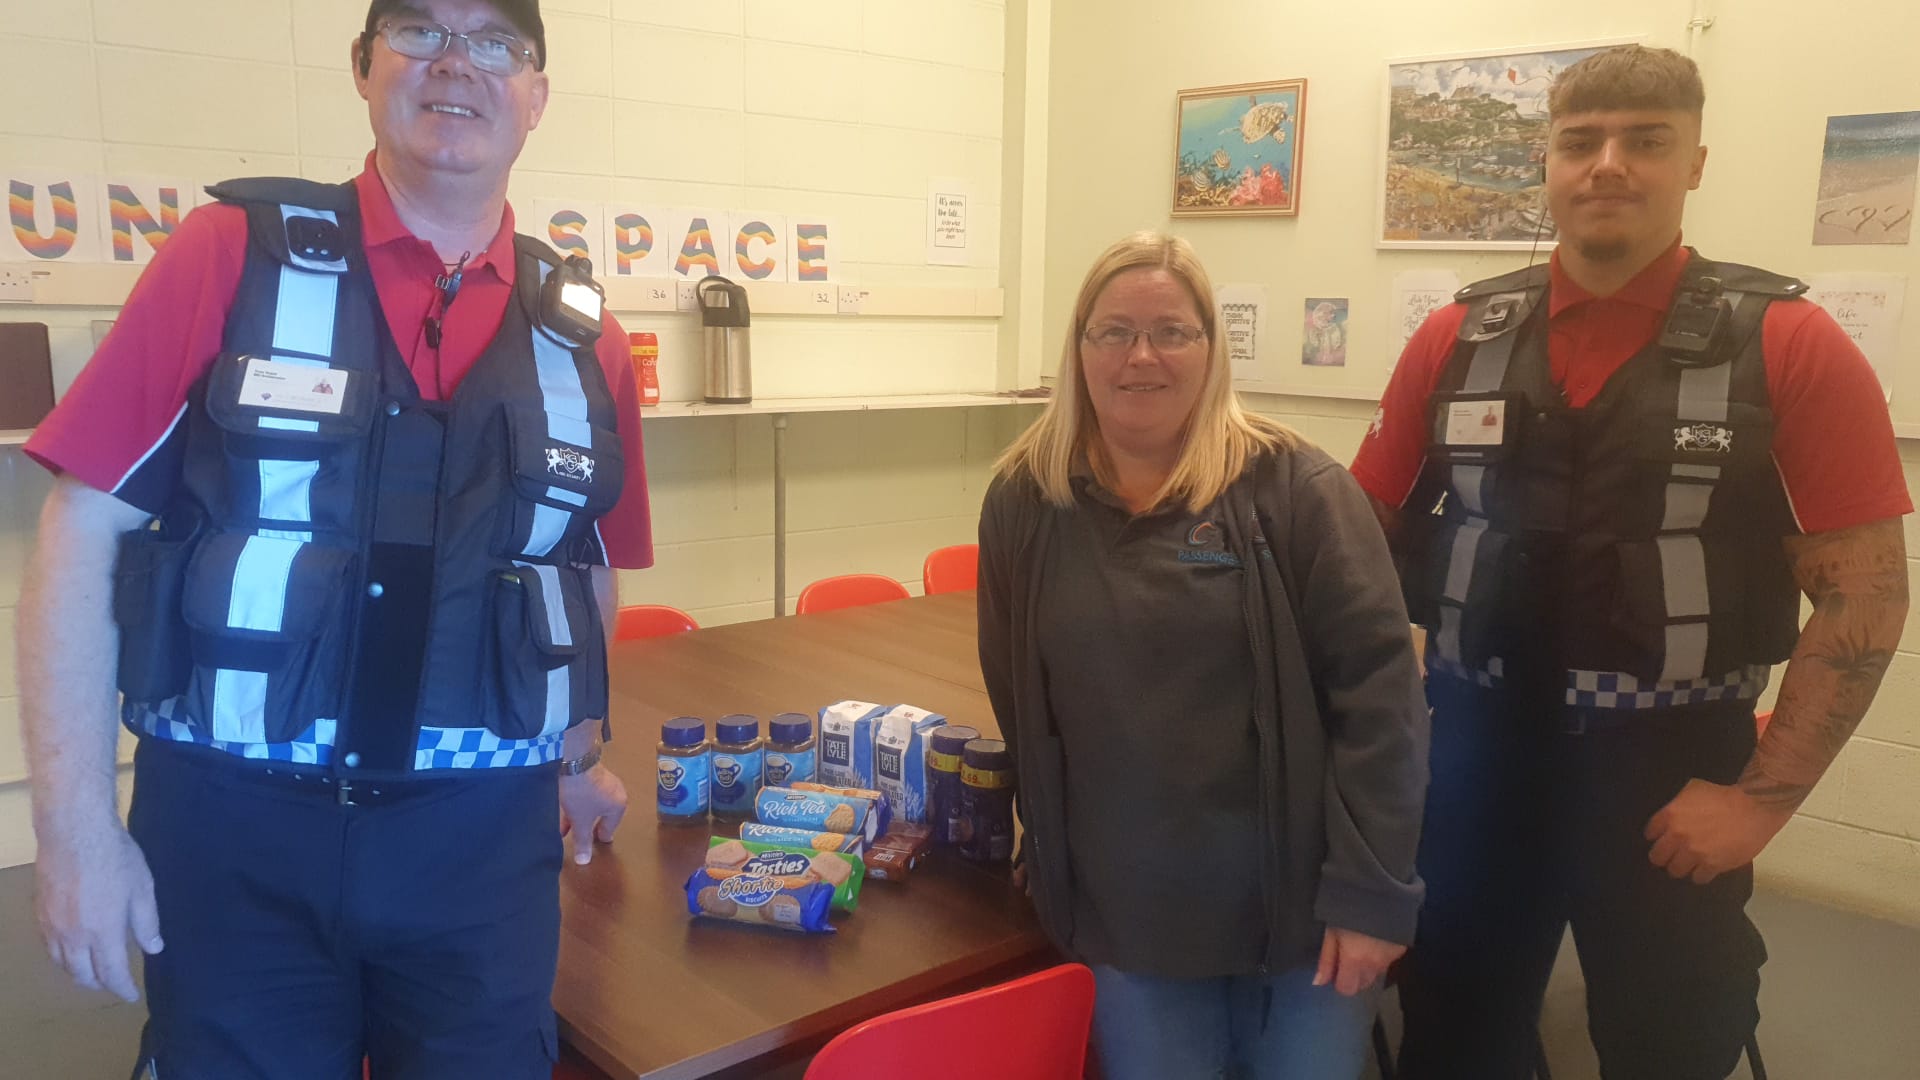 Donation of drinking chocolate, biscuits, coffee and sugar to Community Hub located in West Bromwich Bus Station.